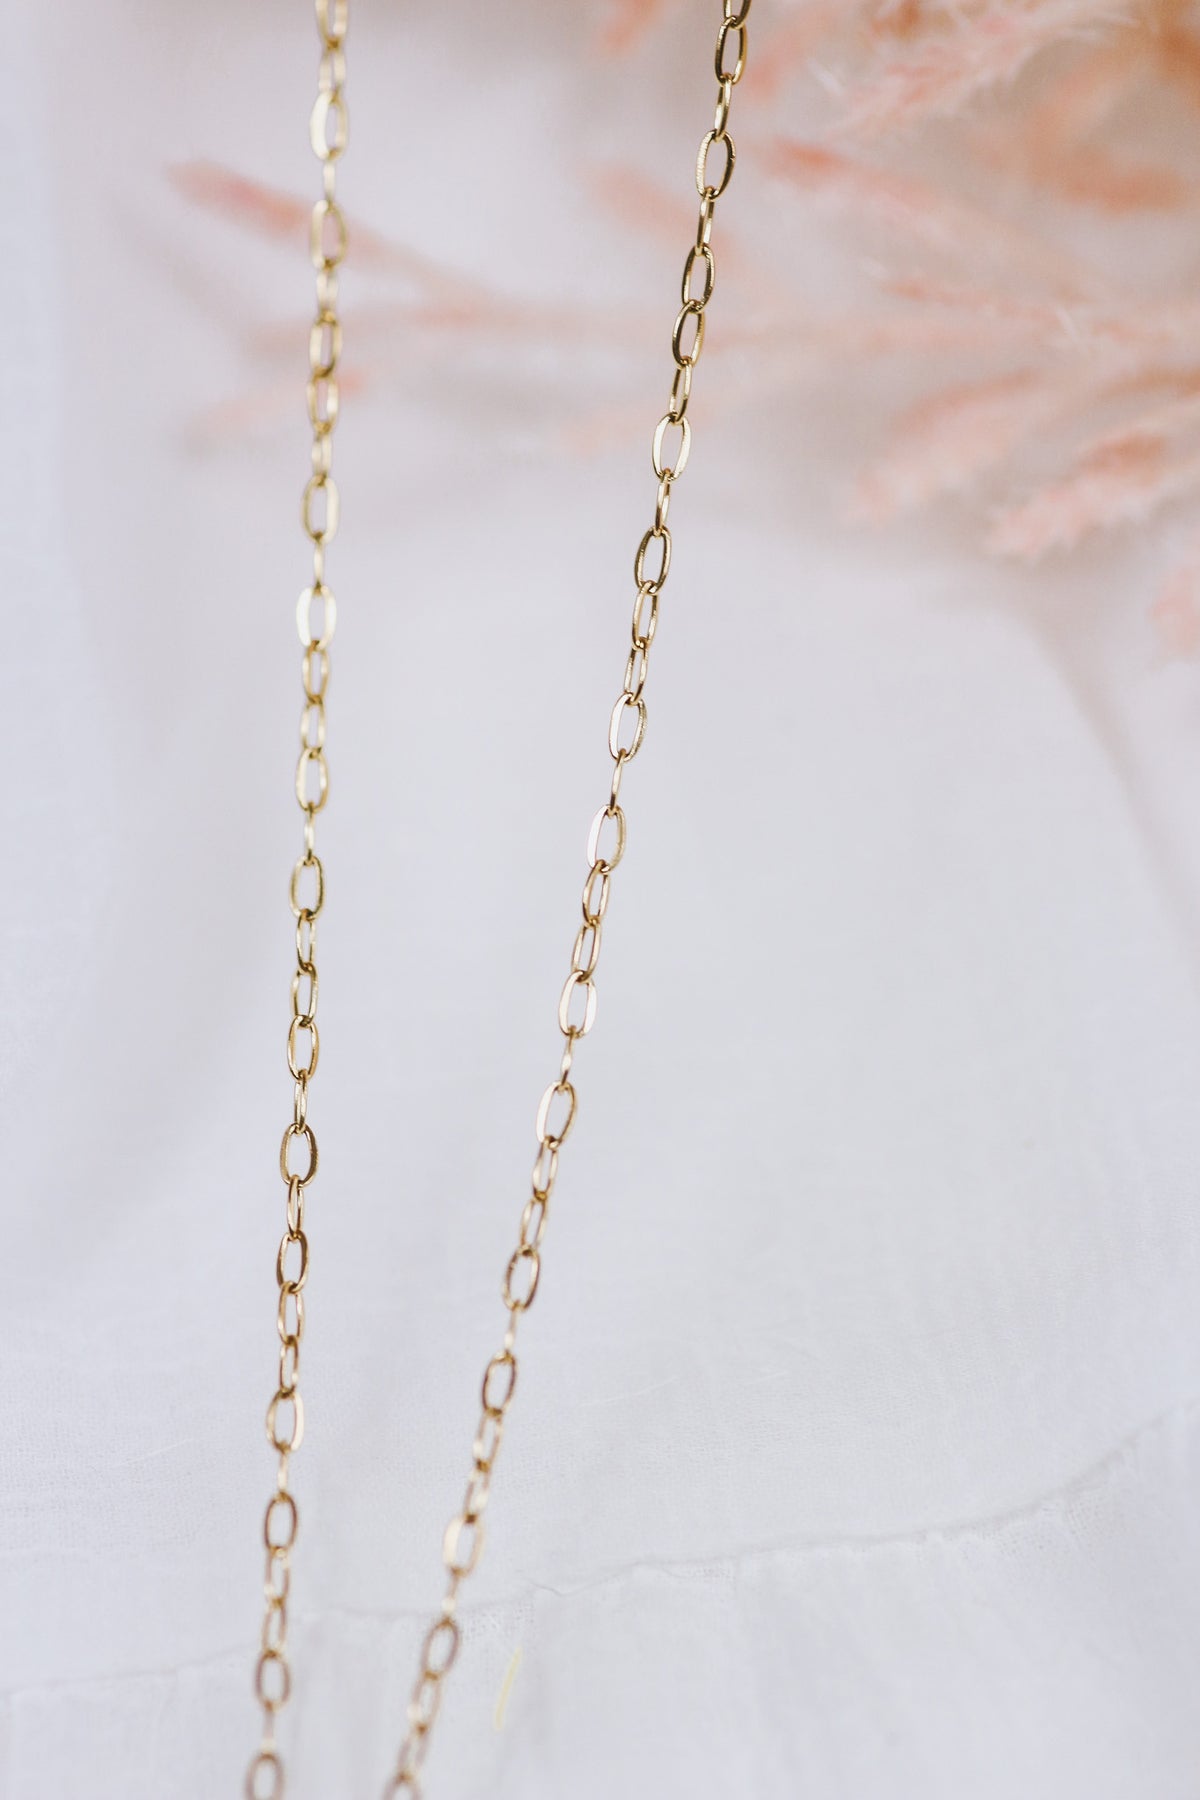 Gold B Initial Necklace